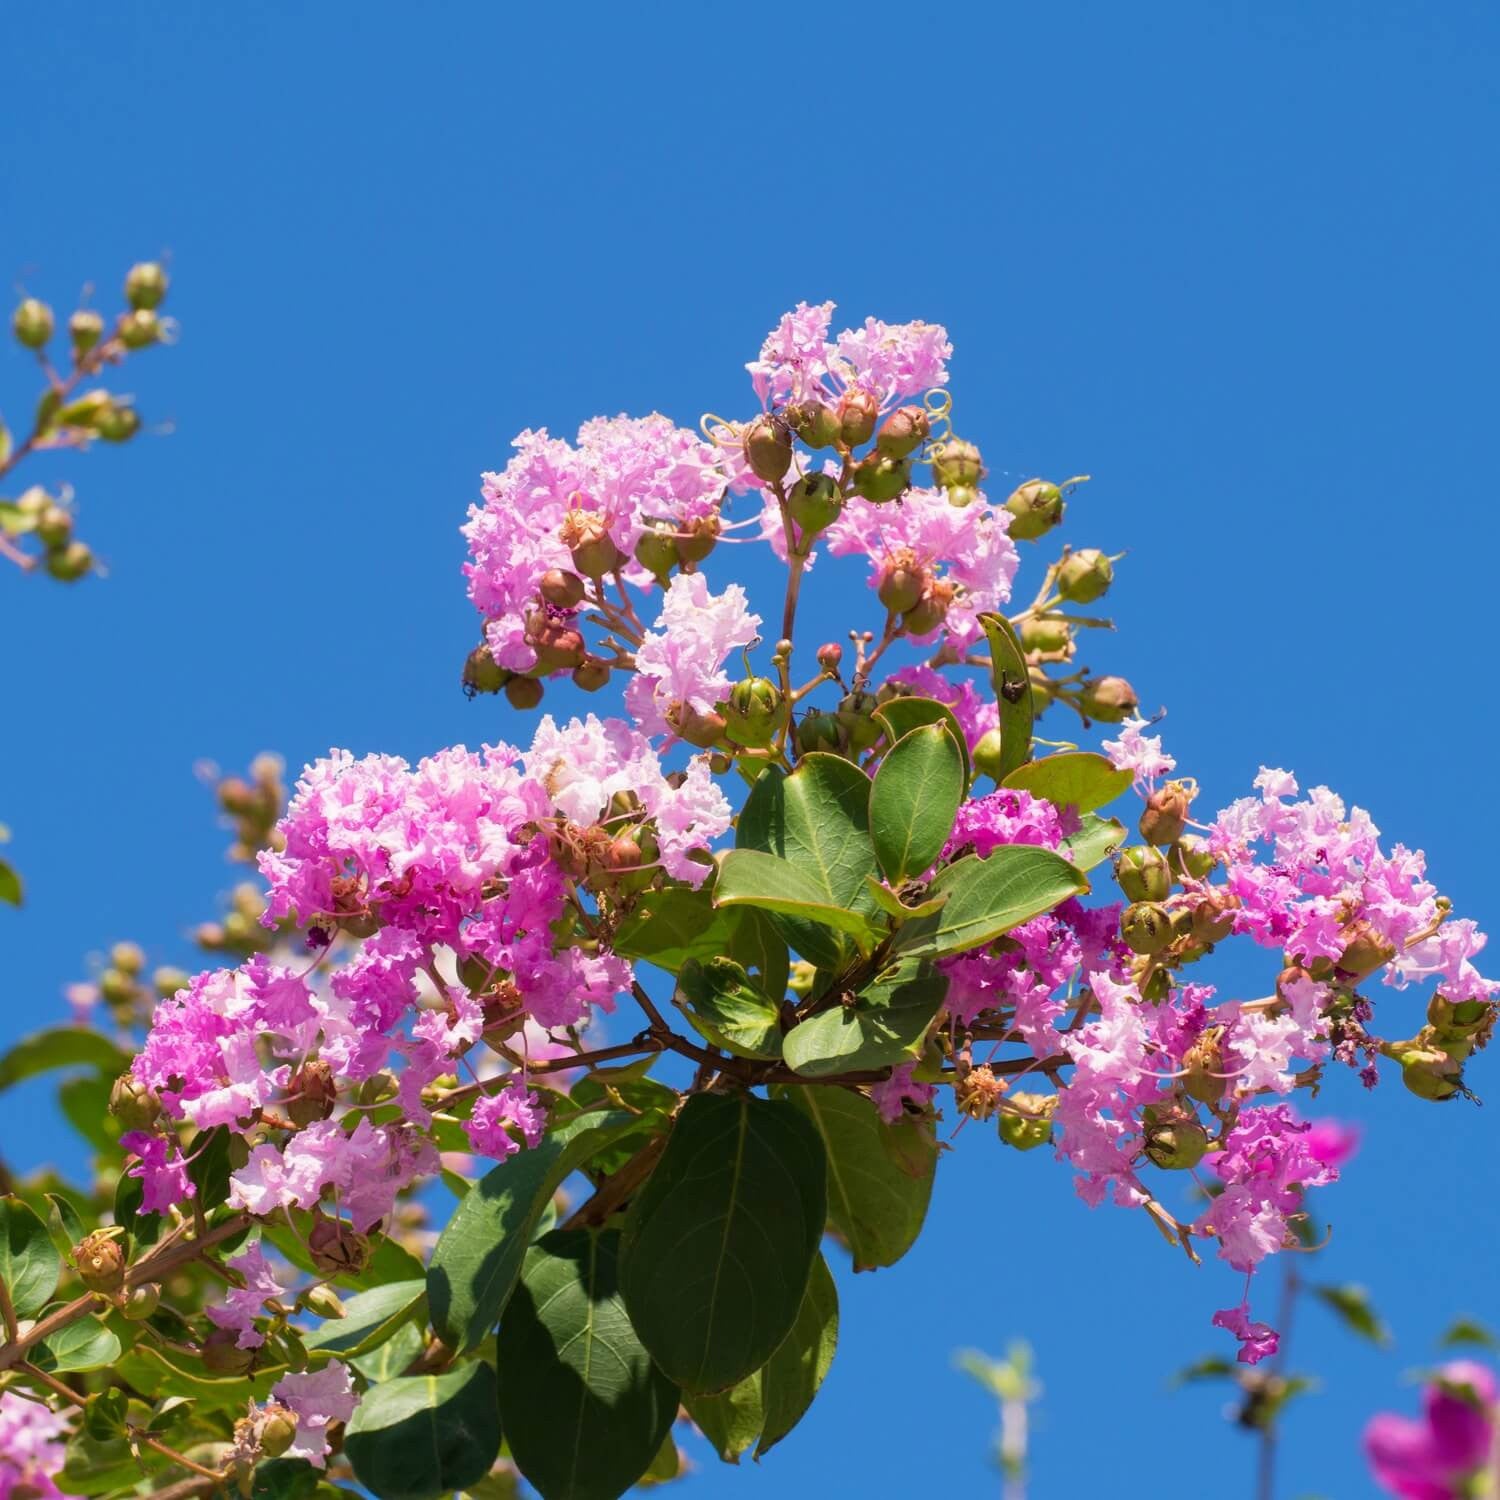 Crapemyrtle: The Lilac of the South!